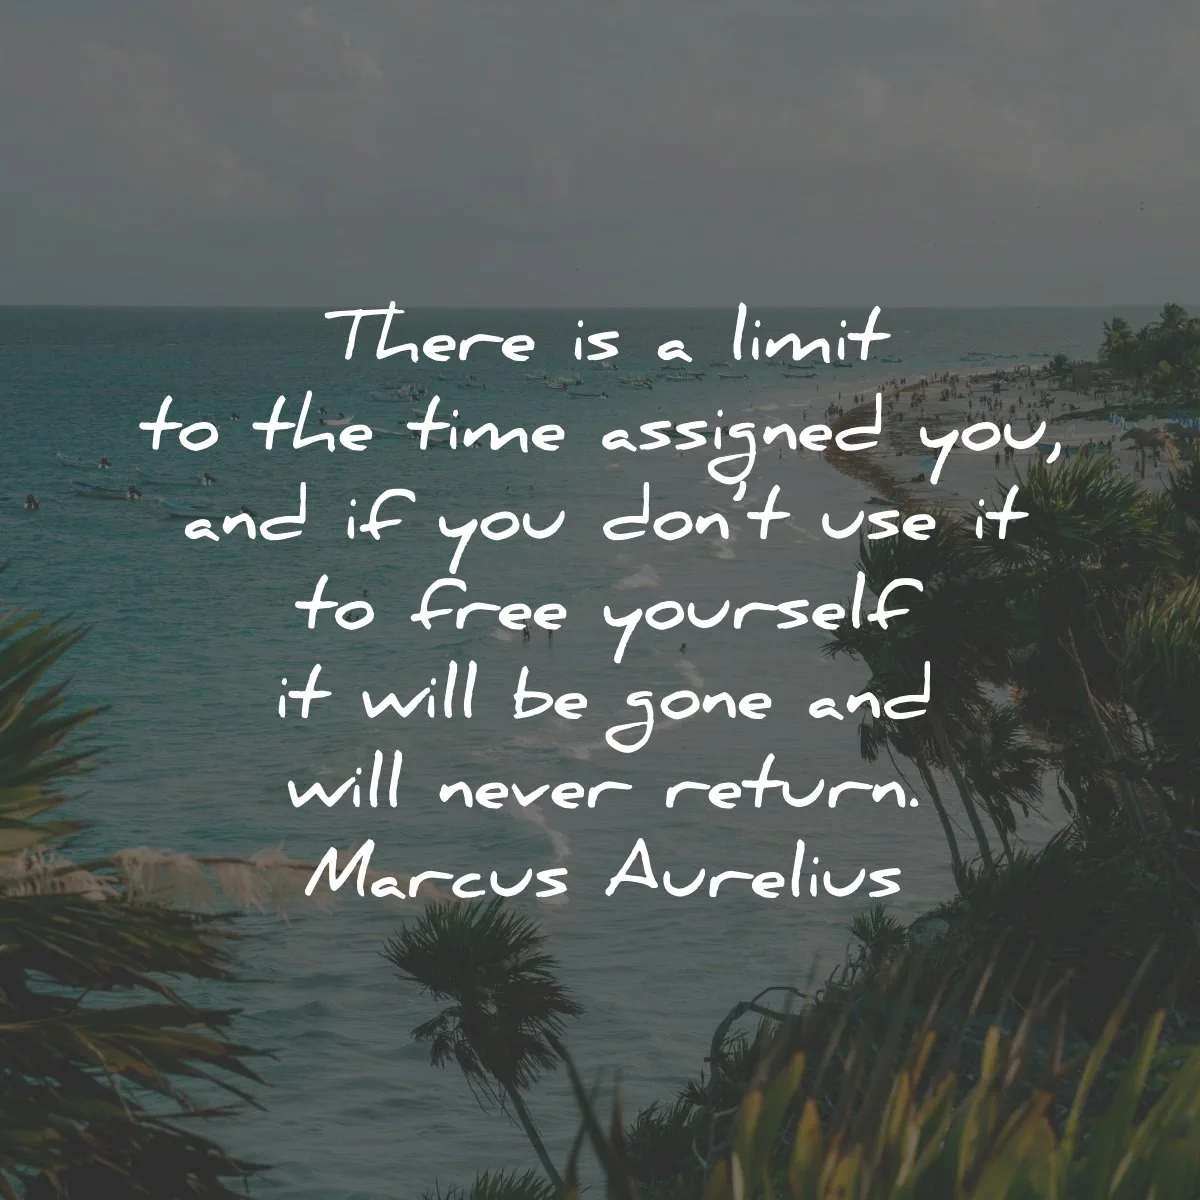 life is short quotes limit time assigned free yourself gone return marcus aurelius wisdom